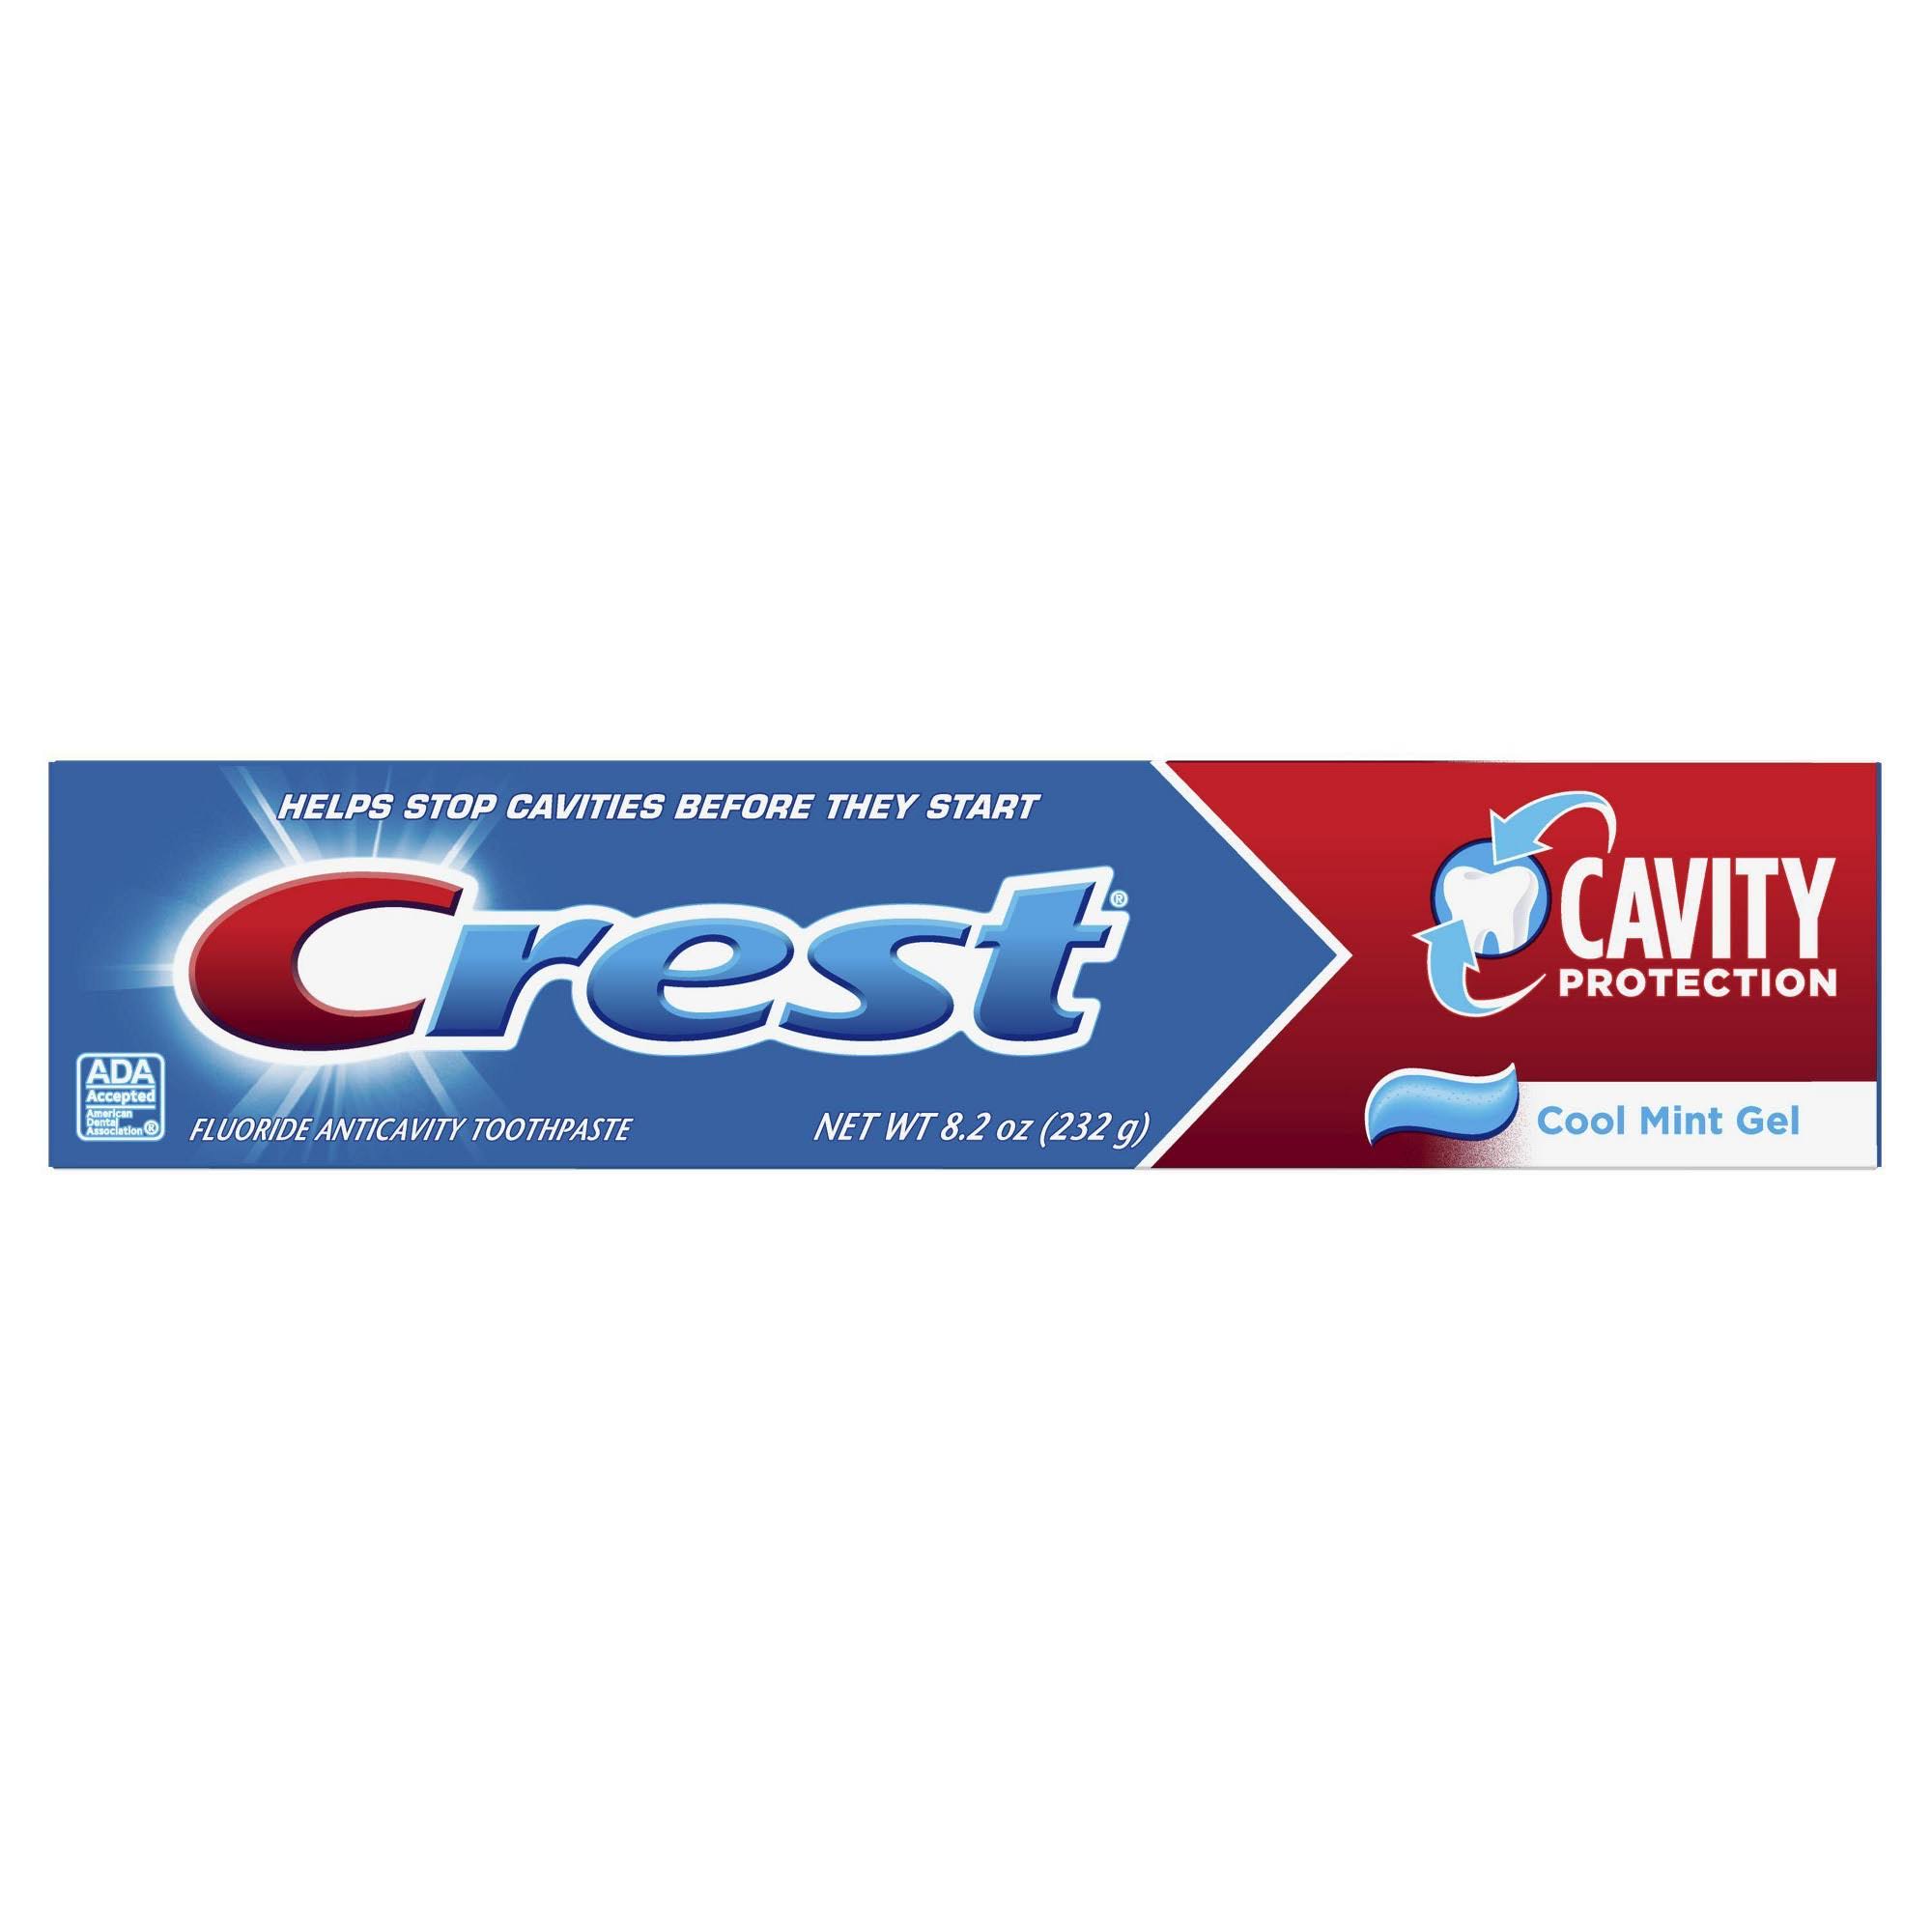 Crest Cavity Protection Toothpaste Gel - Cool Mint, 8.2oz